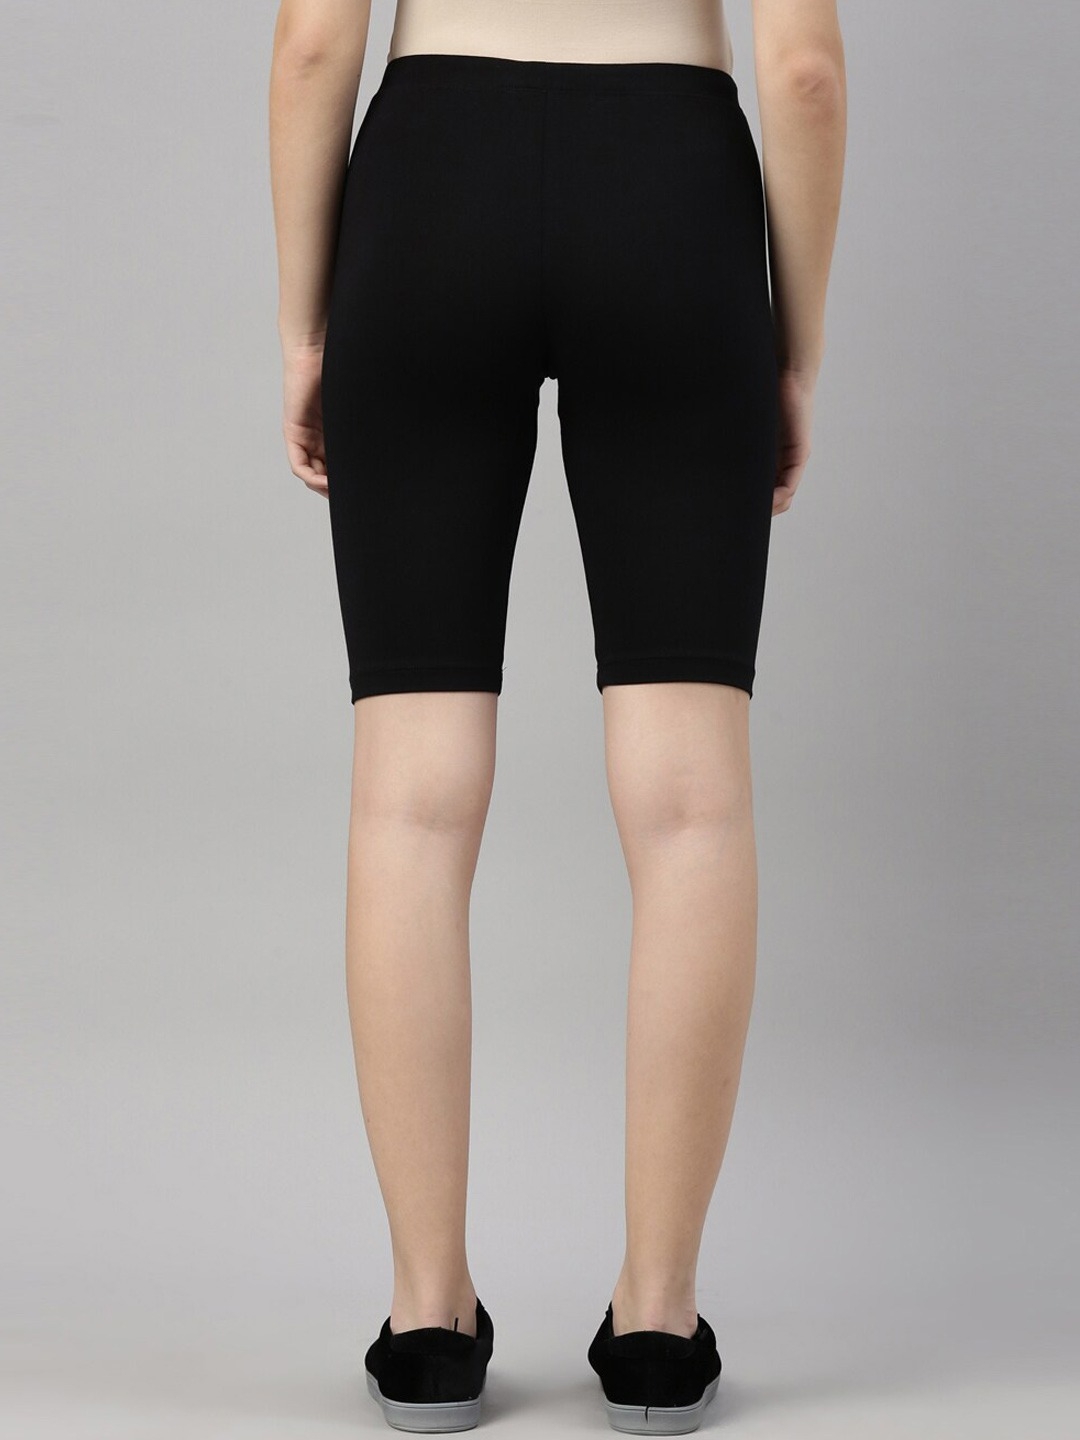 Kryptic | Kryptic Women Fawn and Black Slim Fit Regular Shorts Pack of 2 1